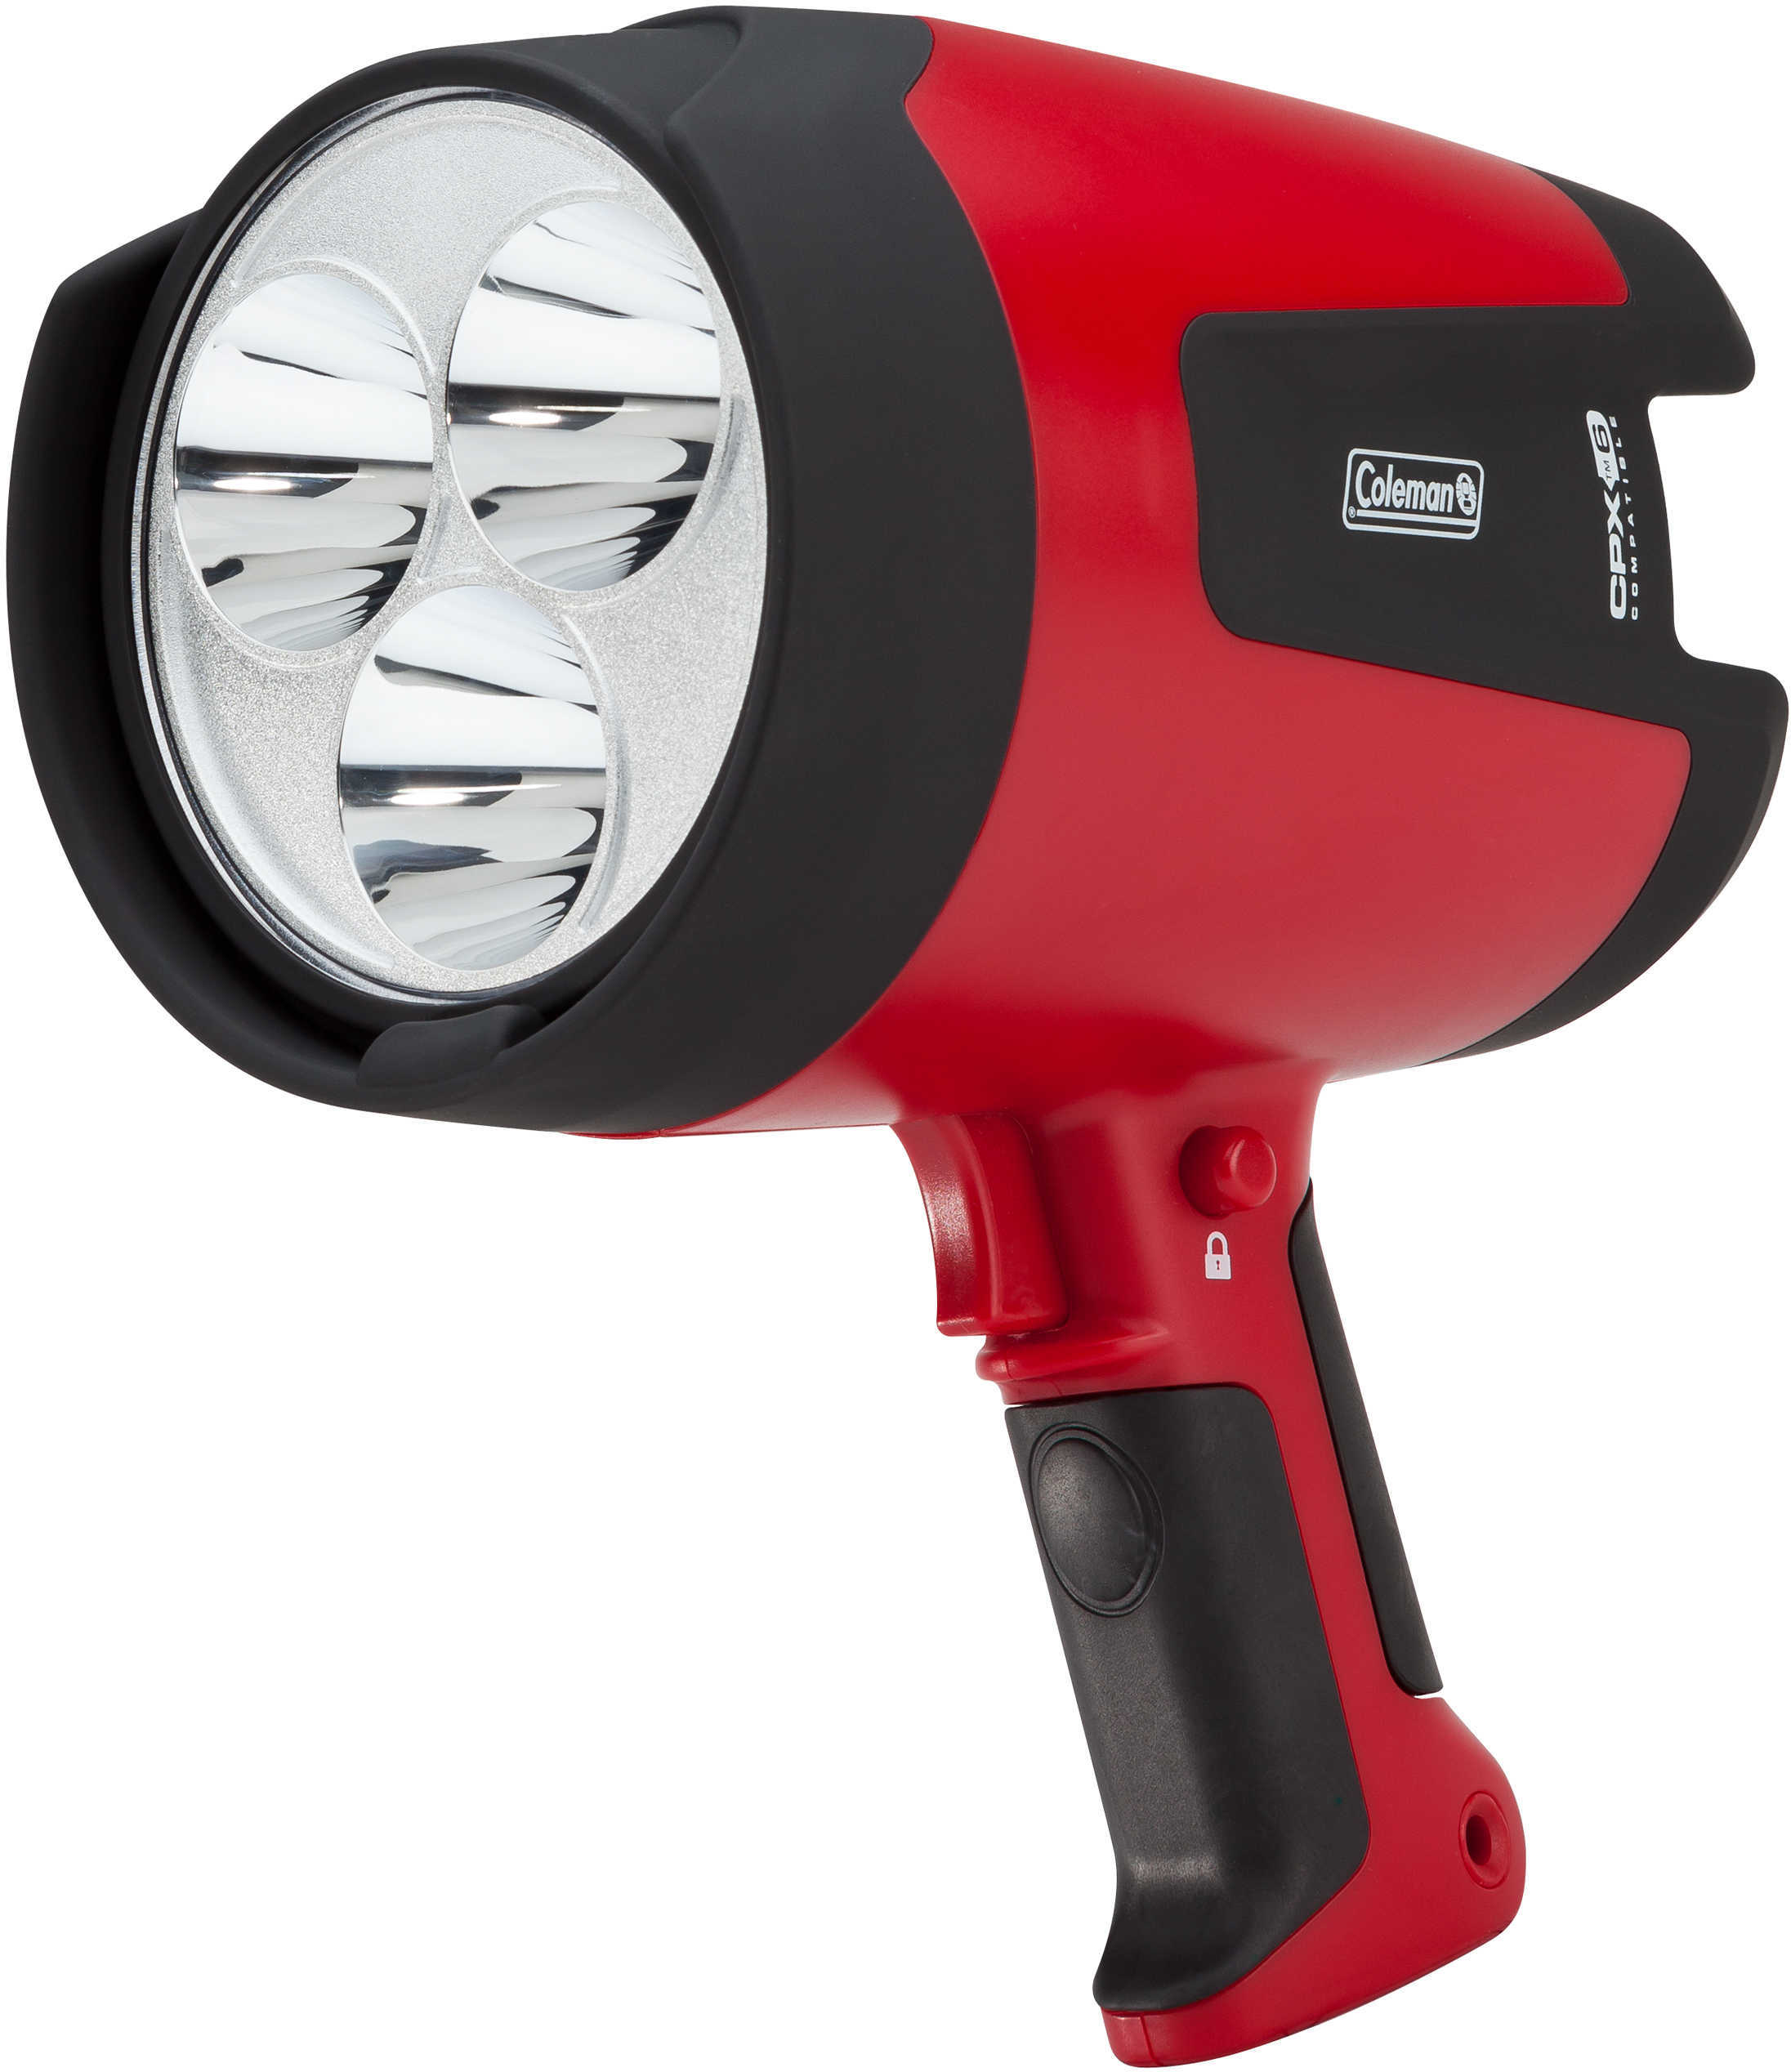 Coleman Spotlight CPX 6 CSP 70, Red/Black Md: 2000012115